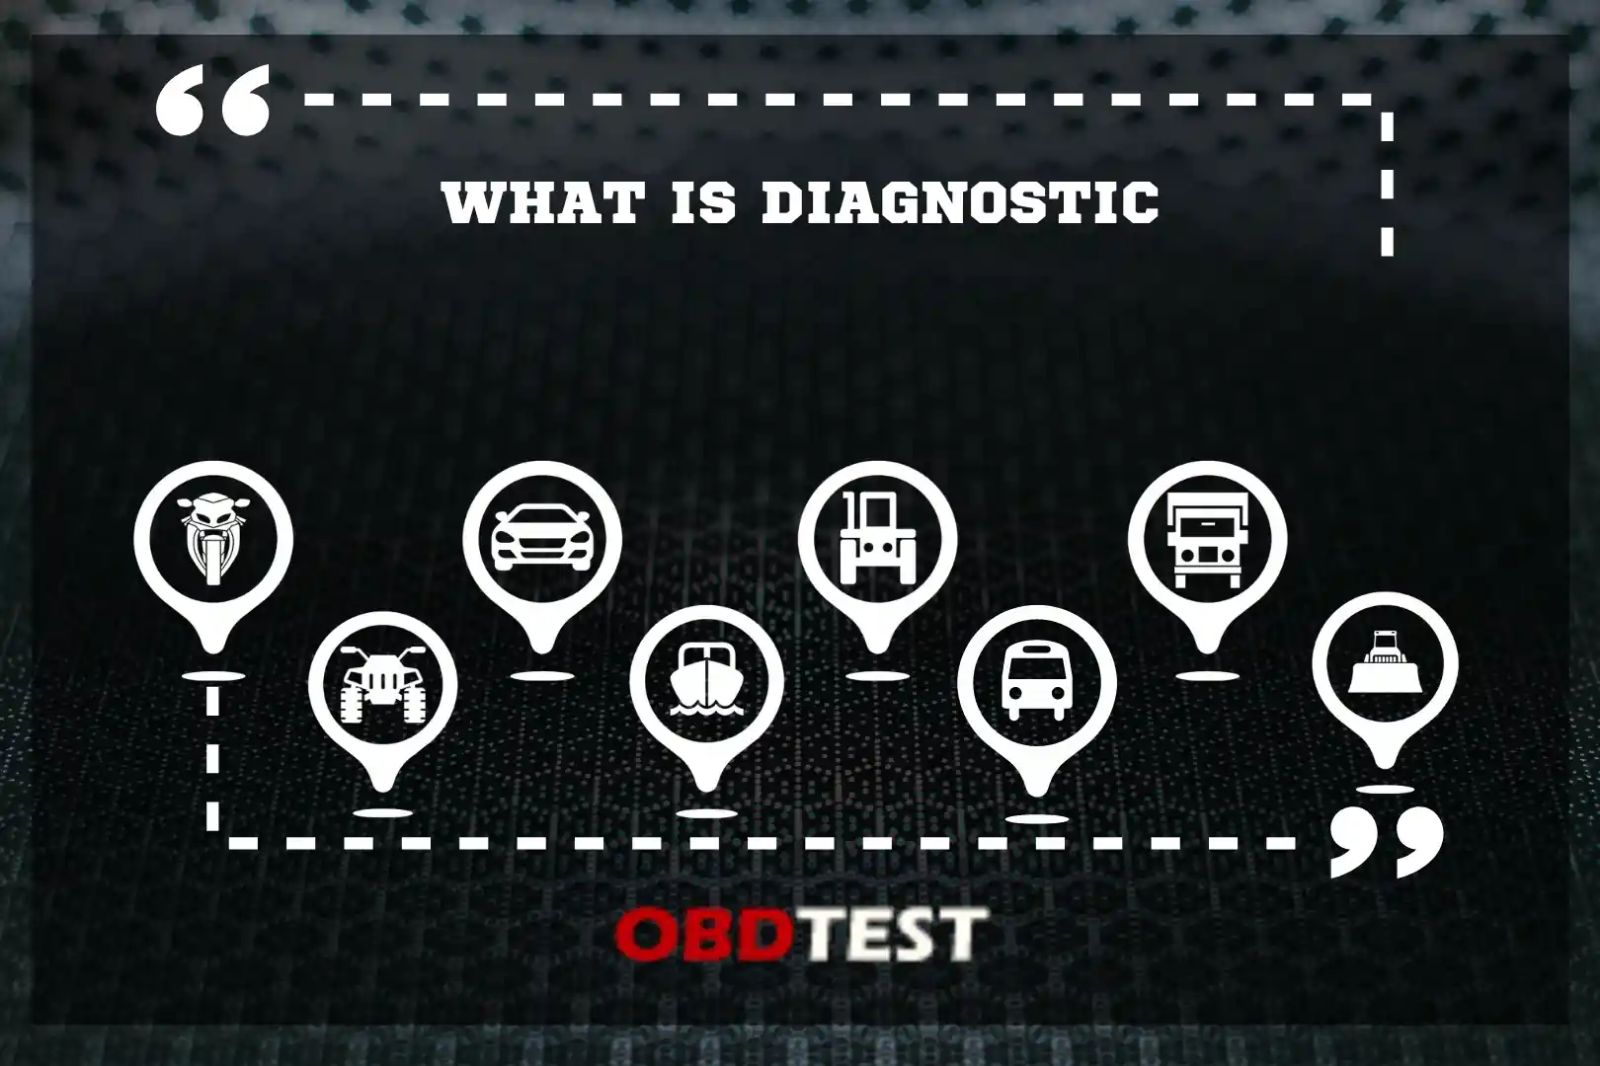 What is Diagnostic?